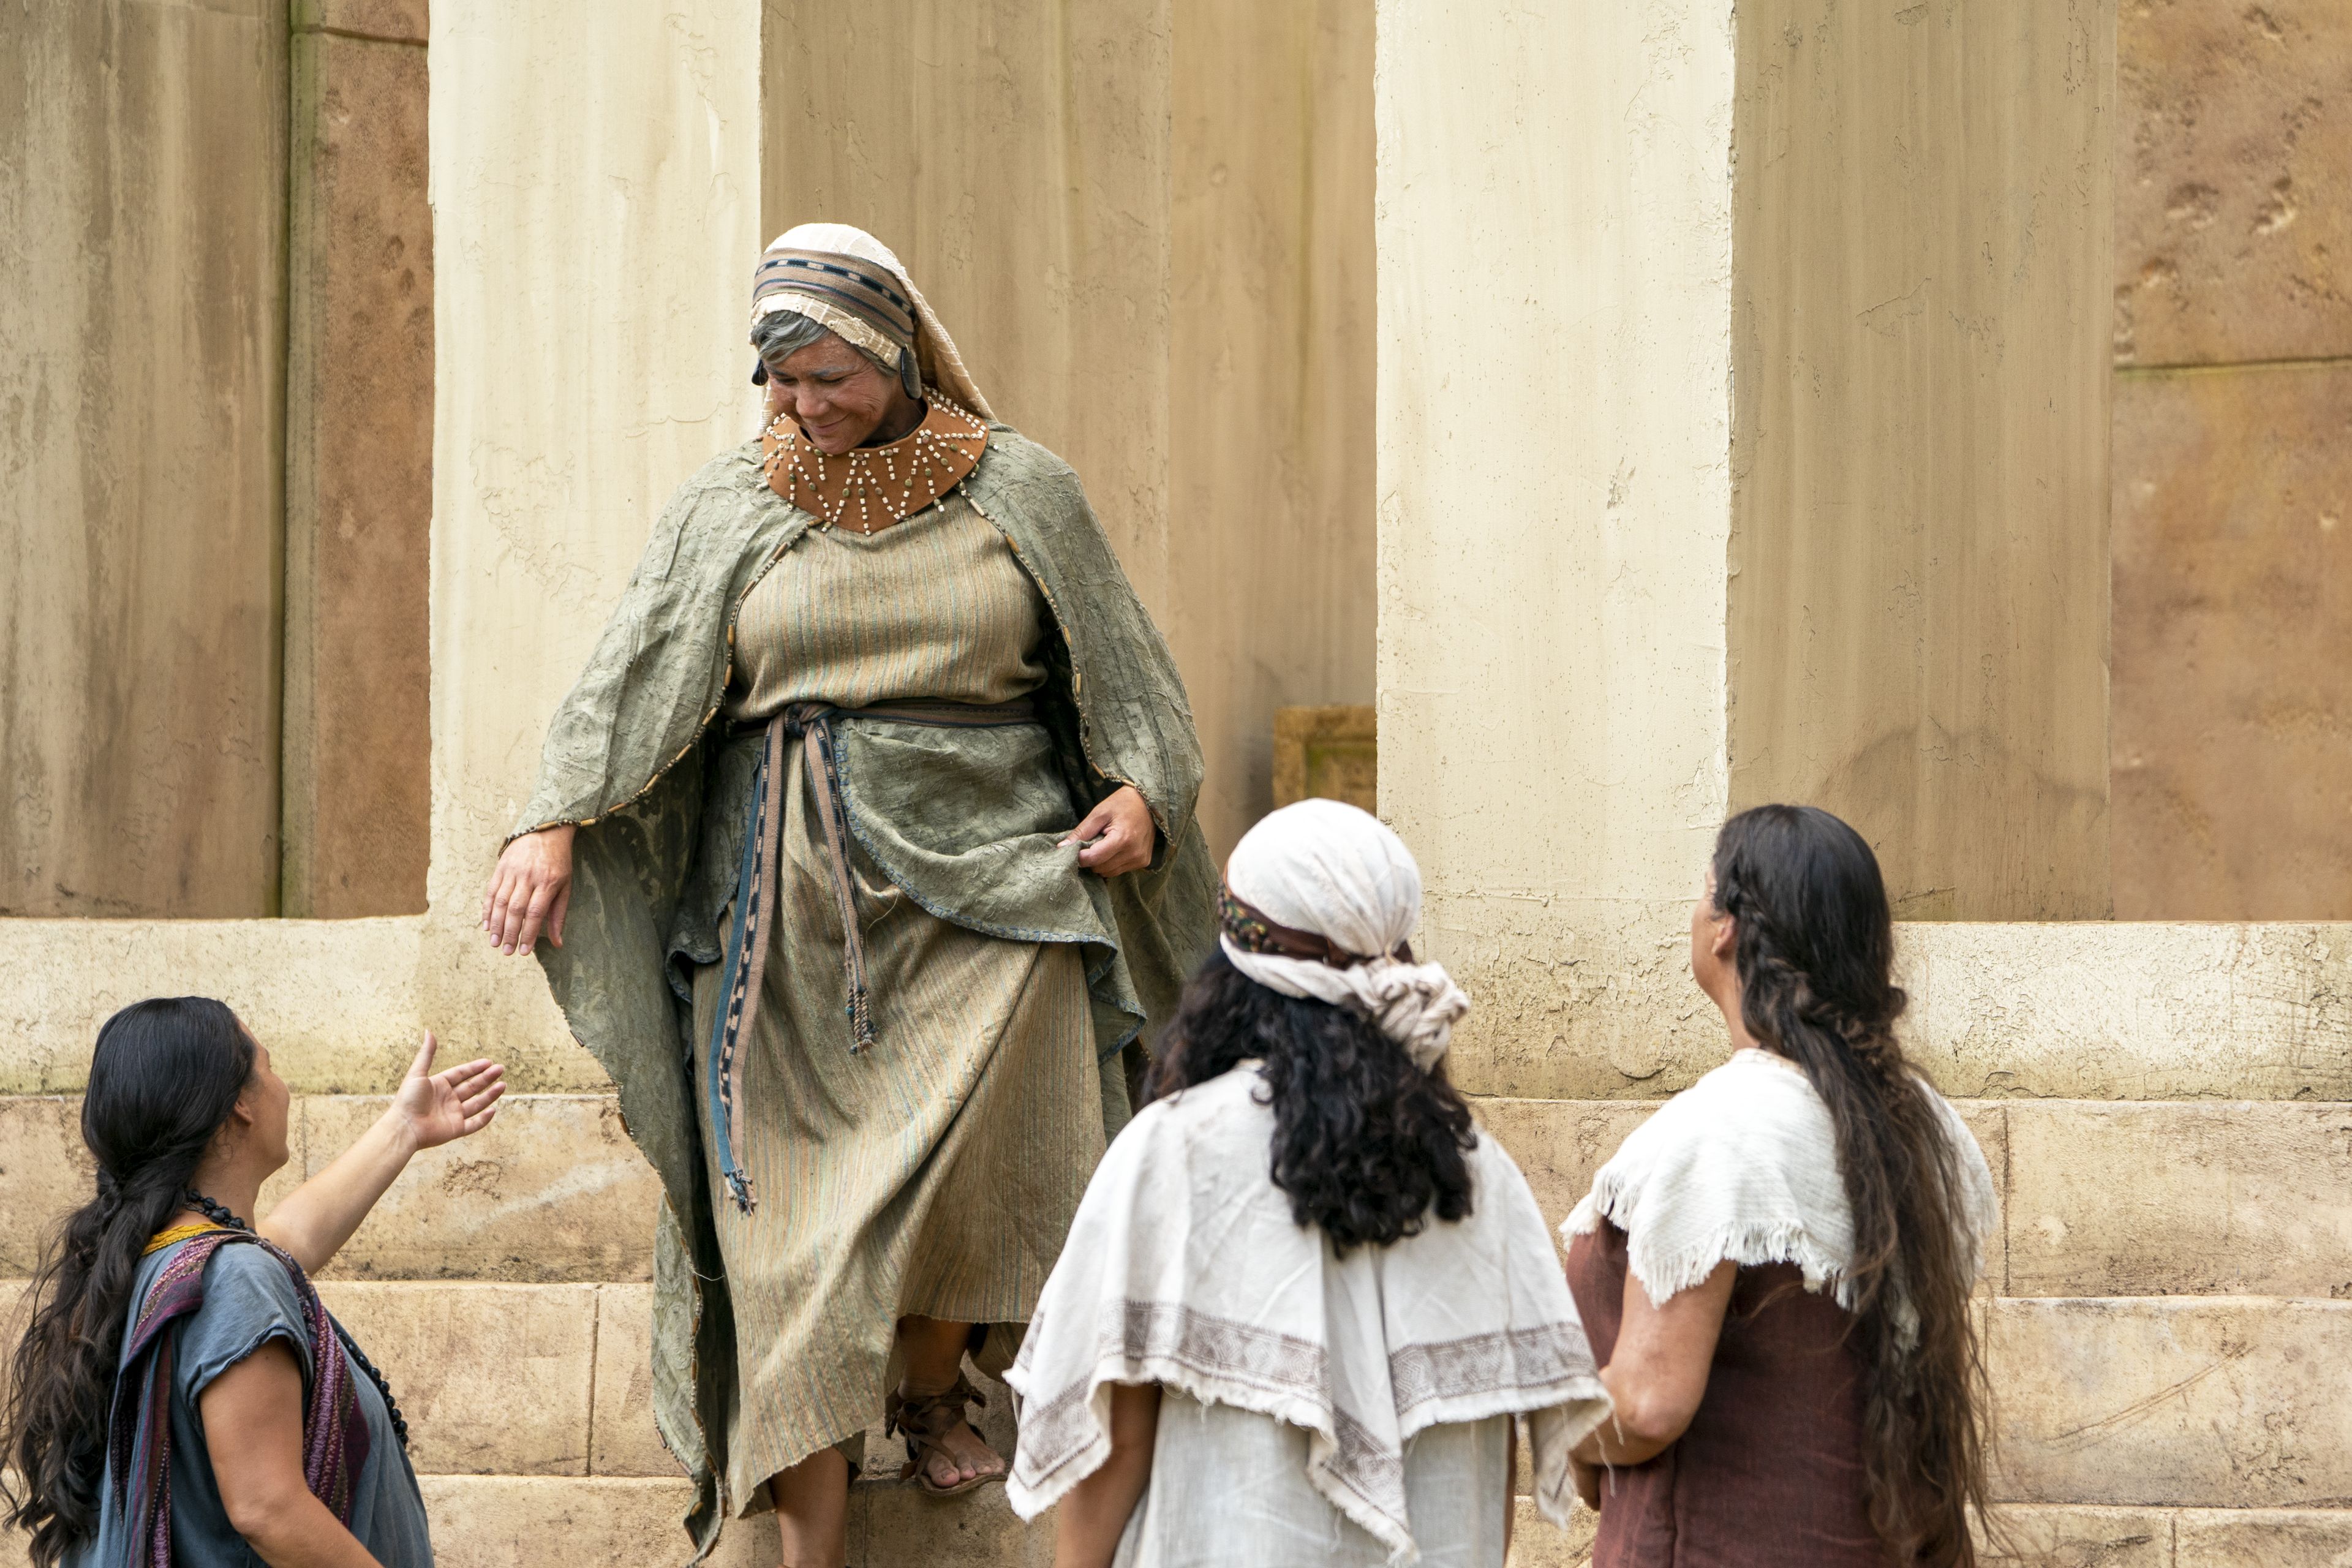 King Benjamin's Wife greets Nephite women as she emerges from the temple in the Land of Zarahemla.